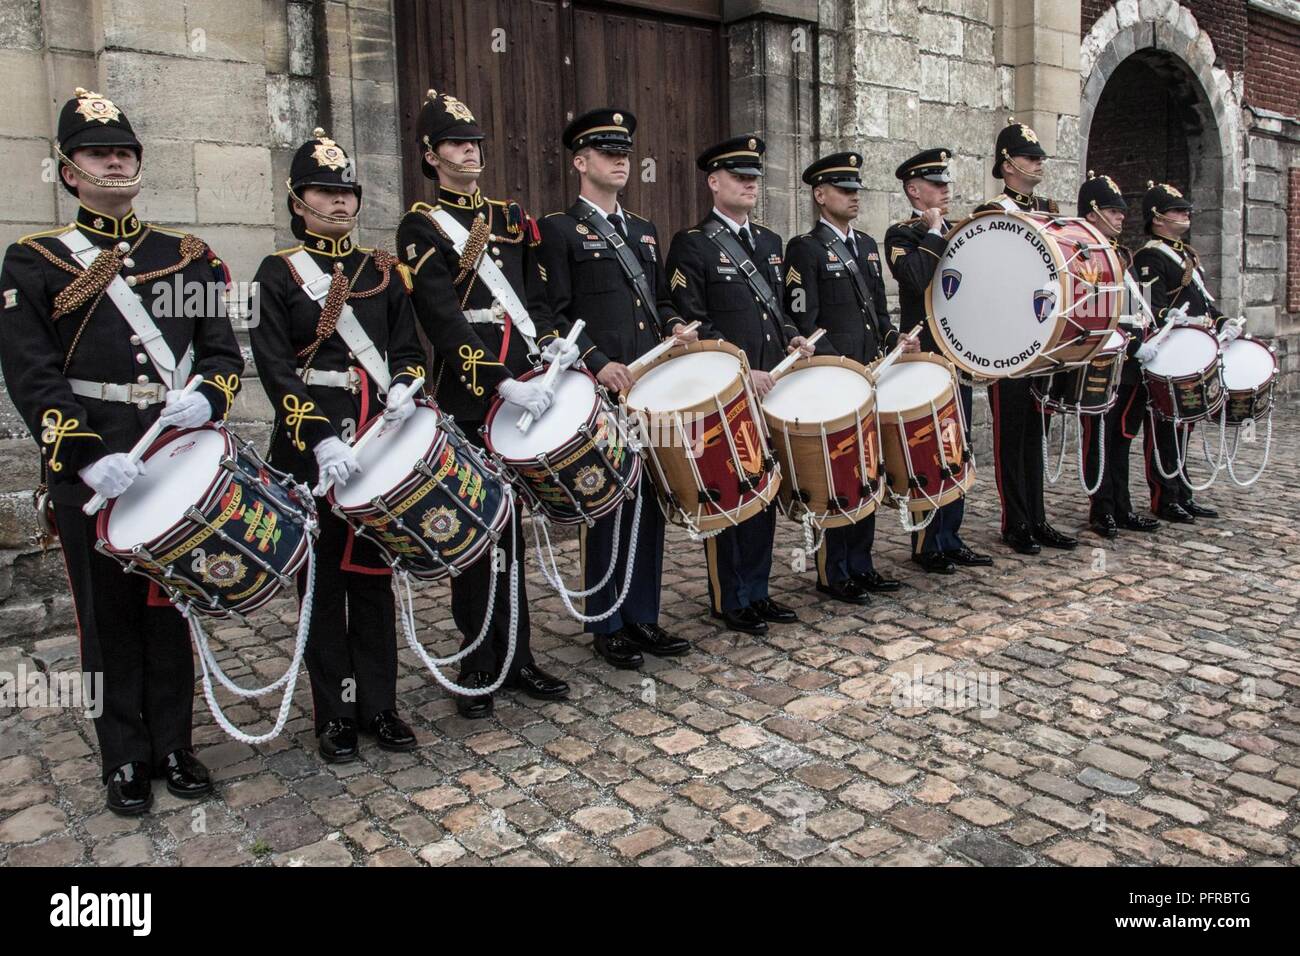 US Army Europe Band drummers stand alongside the drummers of the Royal Logistics Corps at the Citadelle 350 anniversary military show, May 25, 2018, Lille, France.  US Army Stock Photo